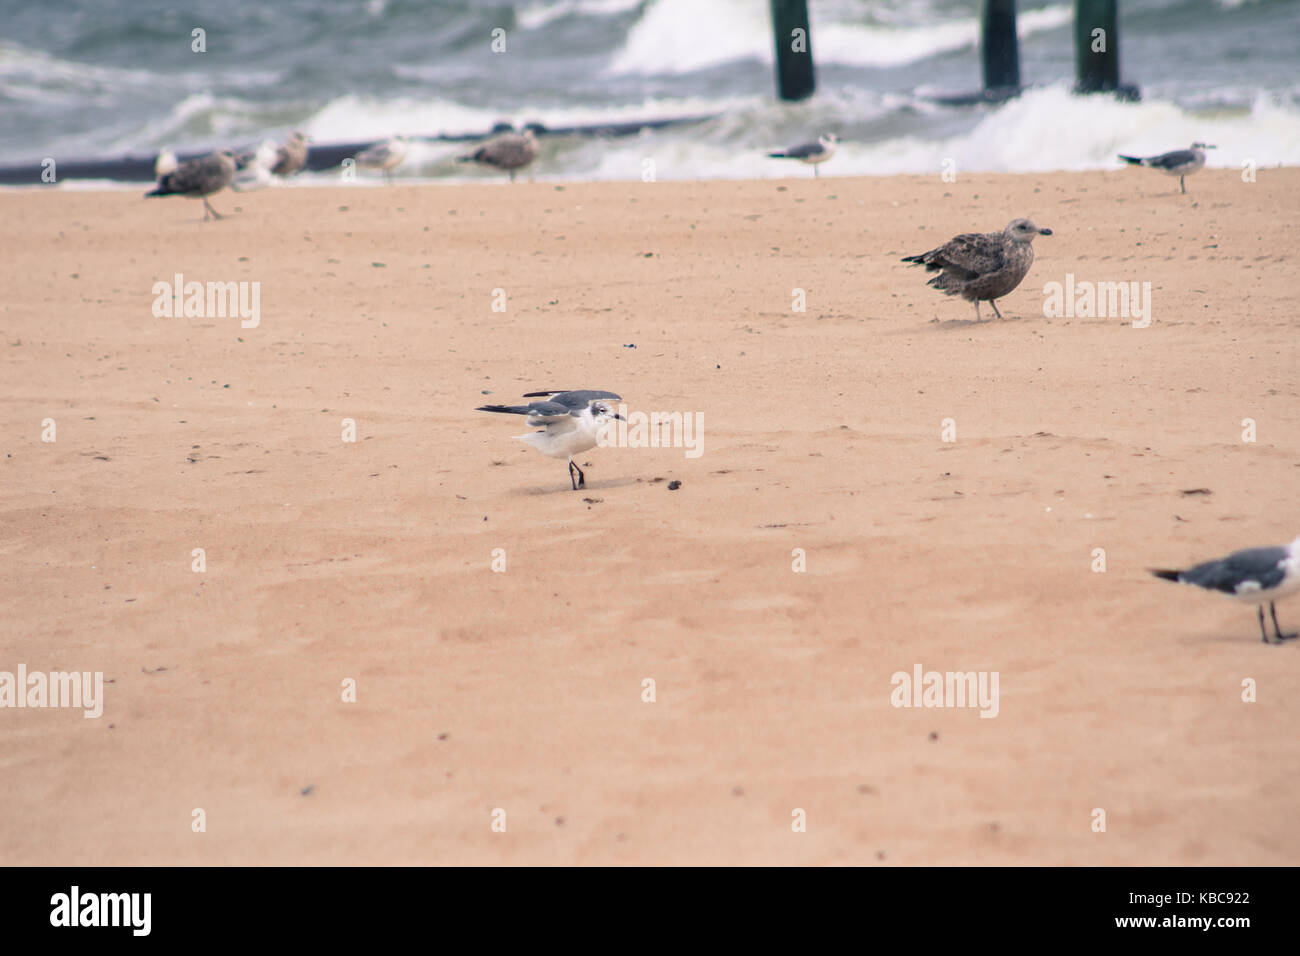 Birds searching for food on the beach as they walk together Stock Photo